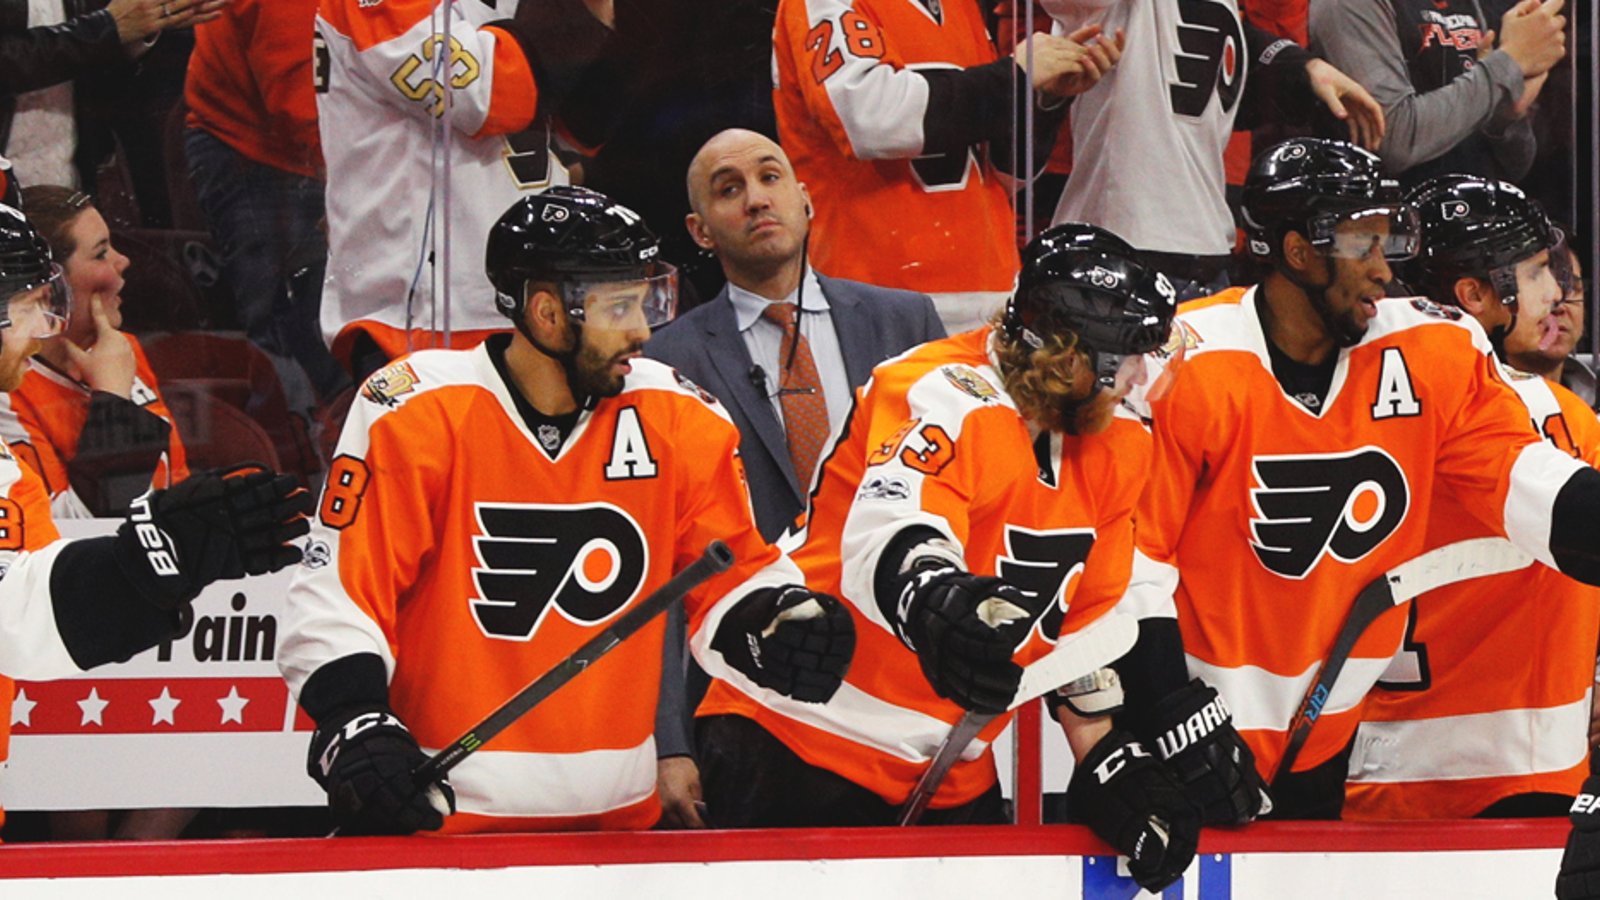 Breaking: The Philadelphia Flyers have made trade.